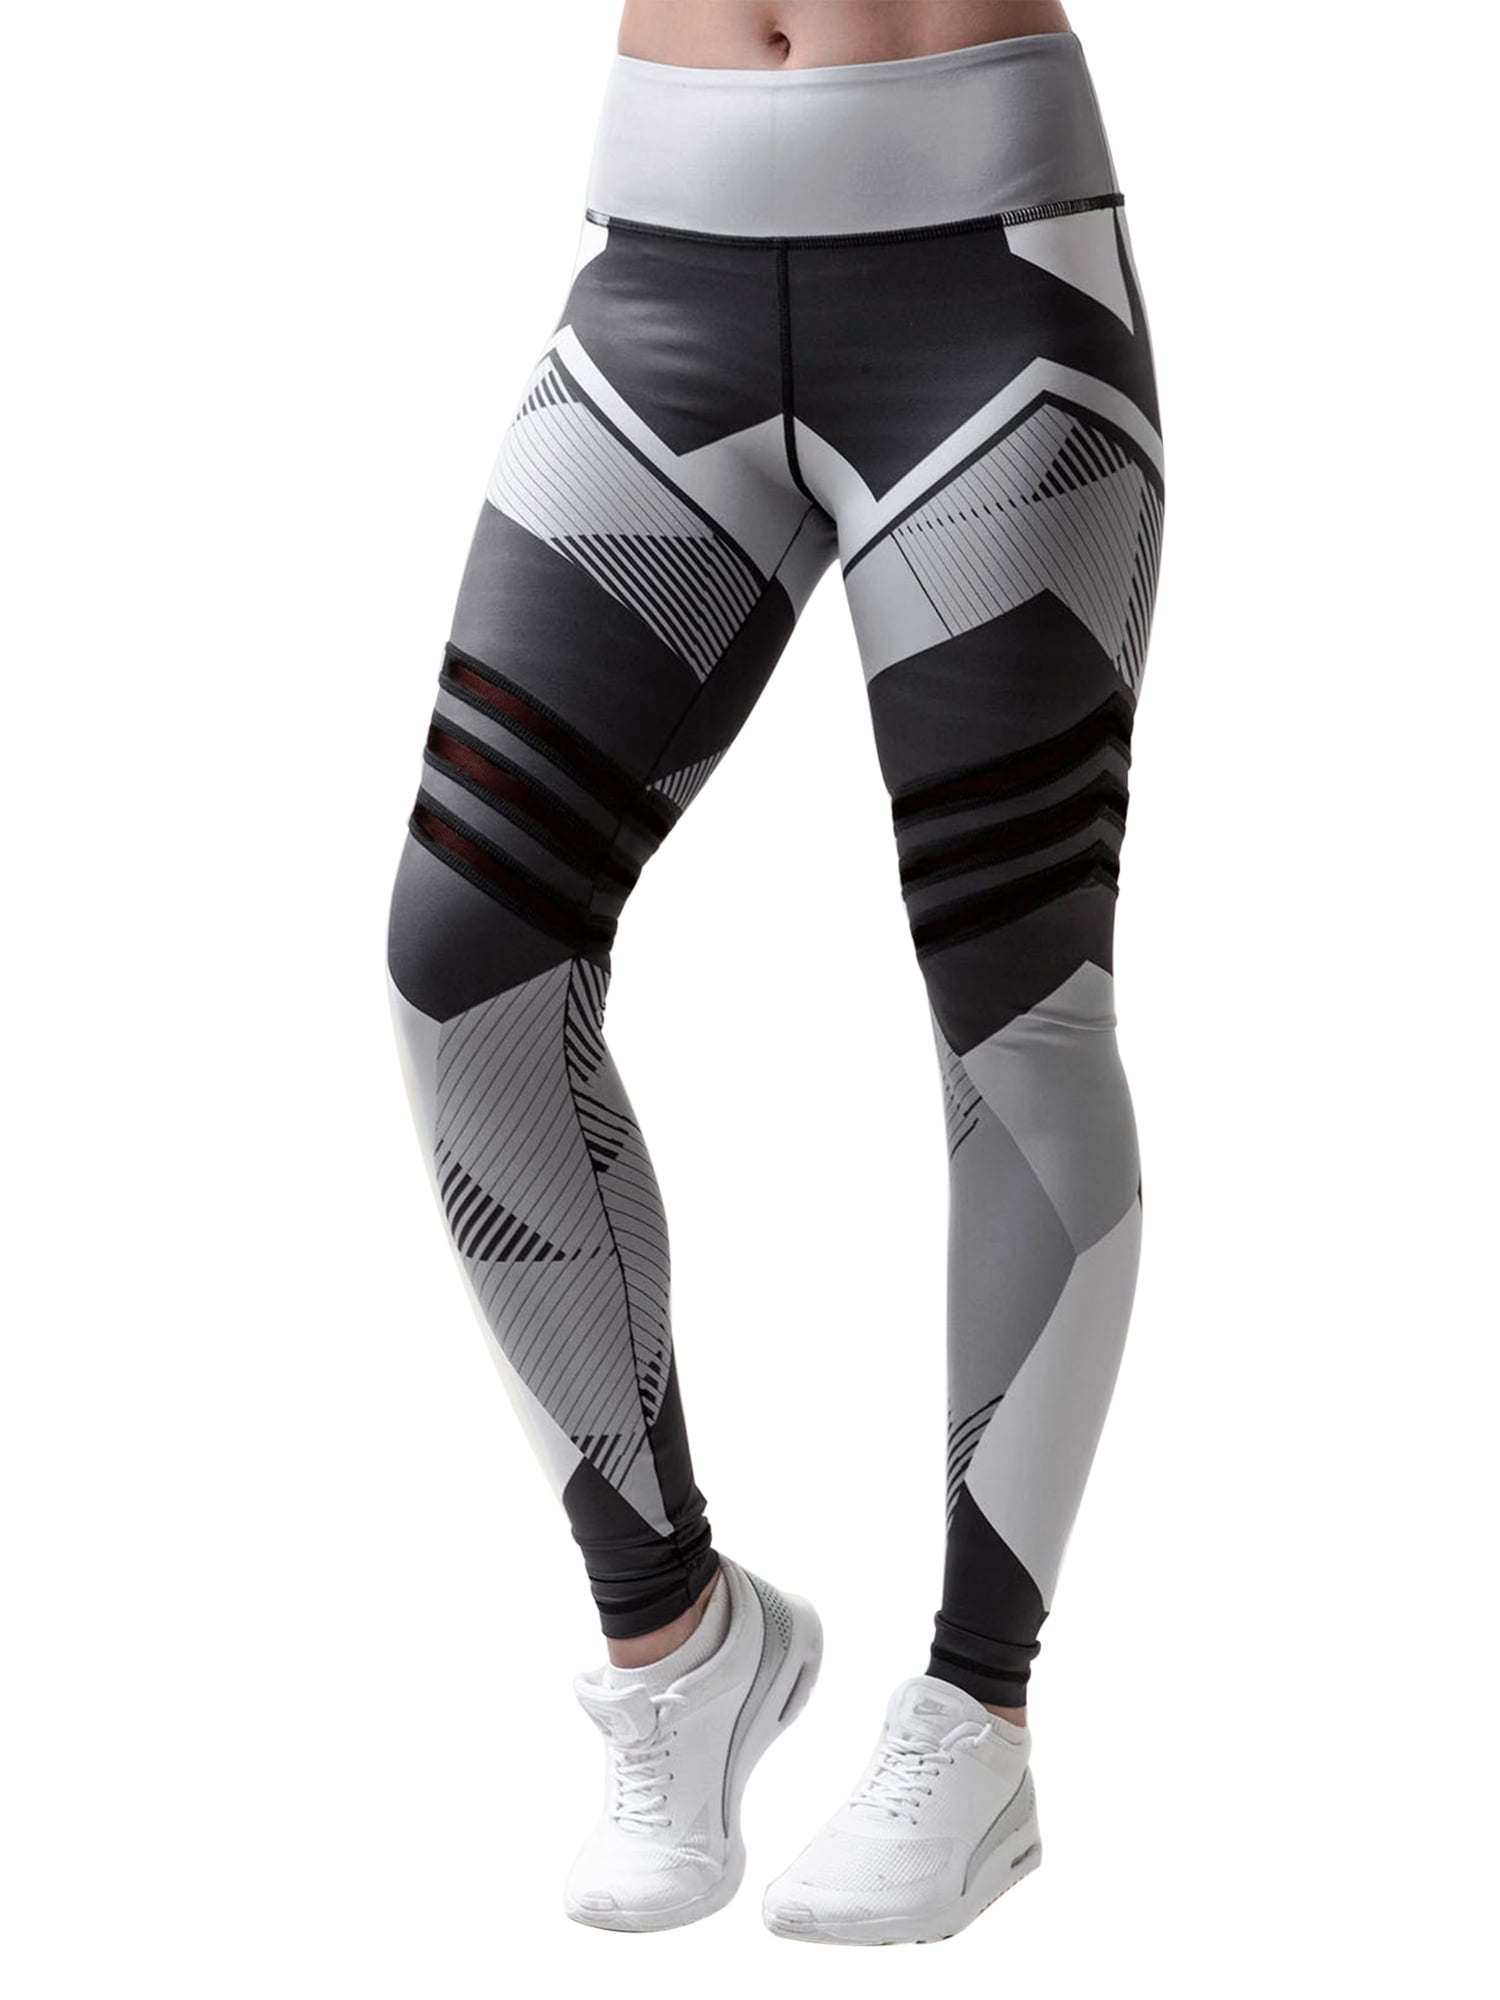 Womens Yoga Workout Gym Leggings Fitness Running Sports Pants Stretch Trouser 